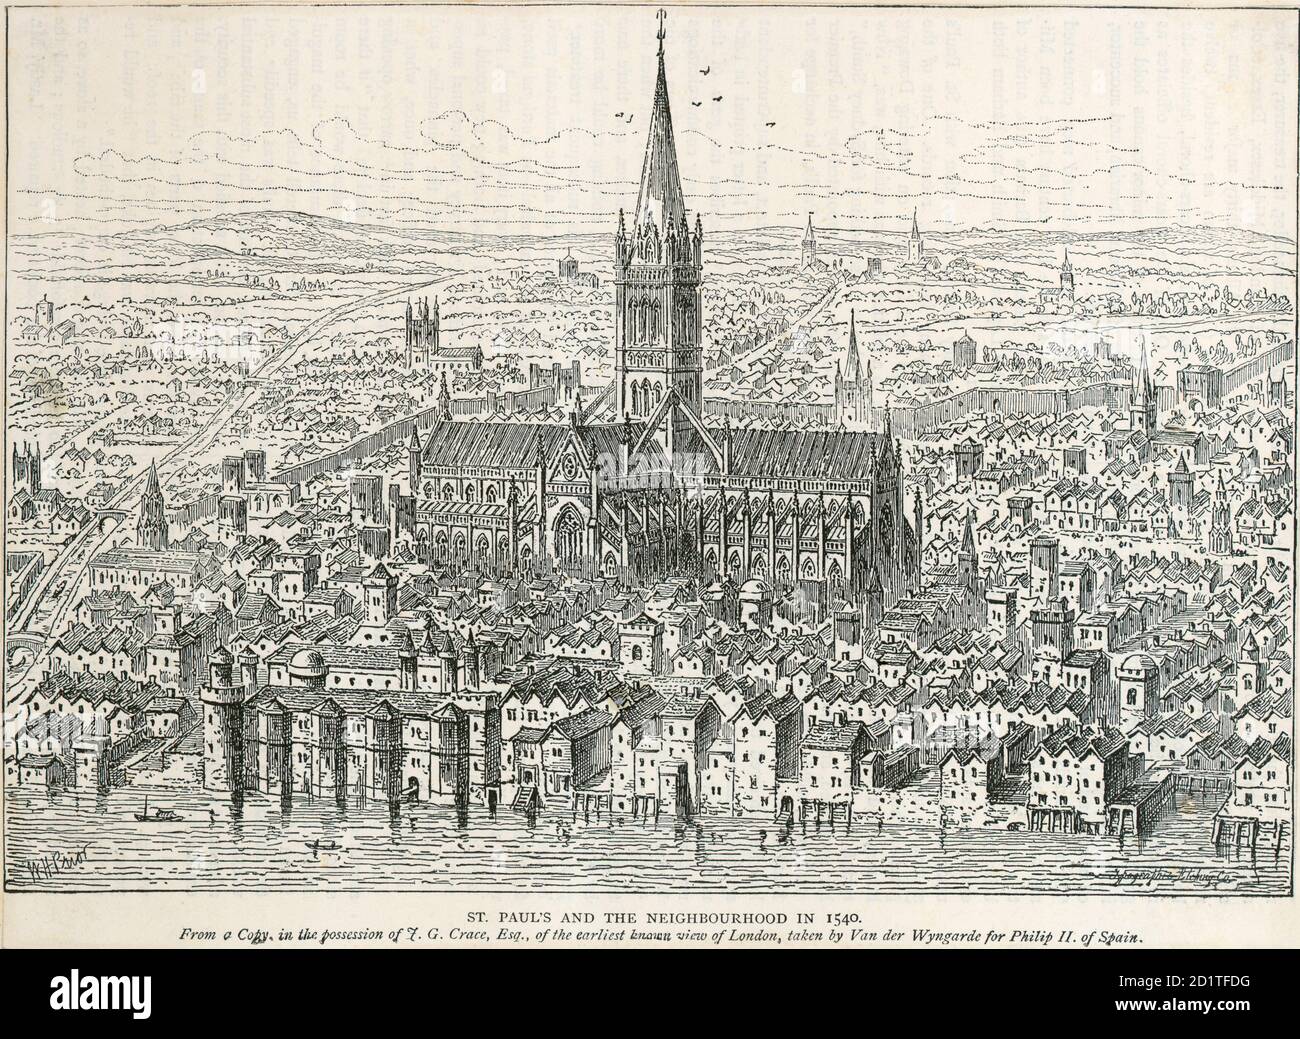 ST PAUL'S CATHEDRAL, St Paul's Churchyard, City of London. London in 1540 showing the Old cathedral before the fire of 1666. Engraving of 1883 taken from an early painting by Wyngarde made for Philip II of Spain. W H Prior delin. From 'Old and New London' Vol I by Walter Thornbury 1883-5. From the Mayson Beeton Collection. Stock Photo